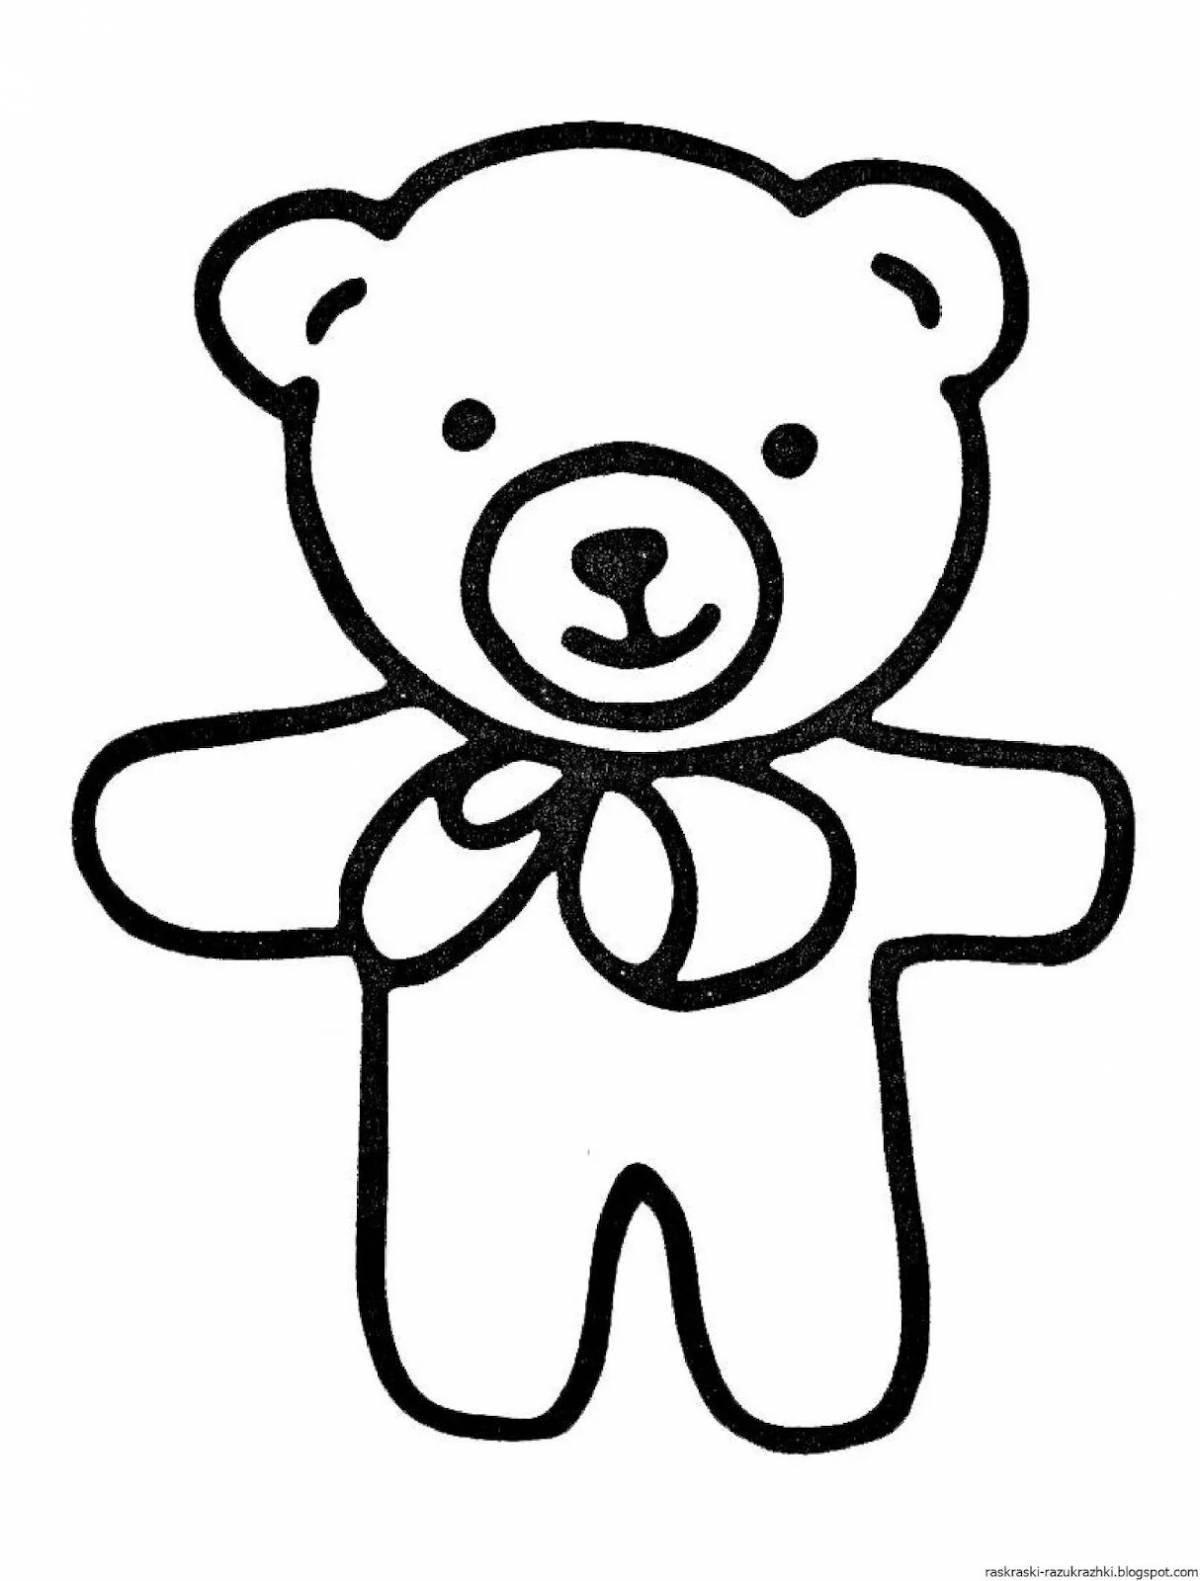 Fancy coloring bear for children 3-4 years old